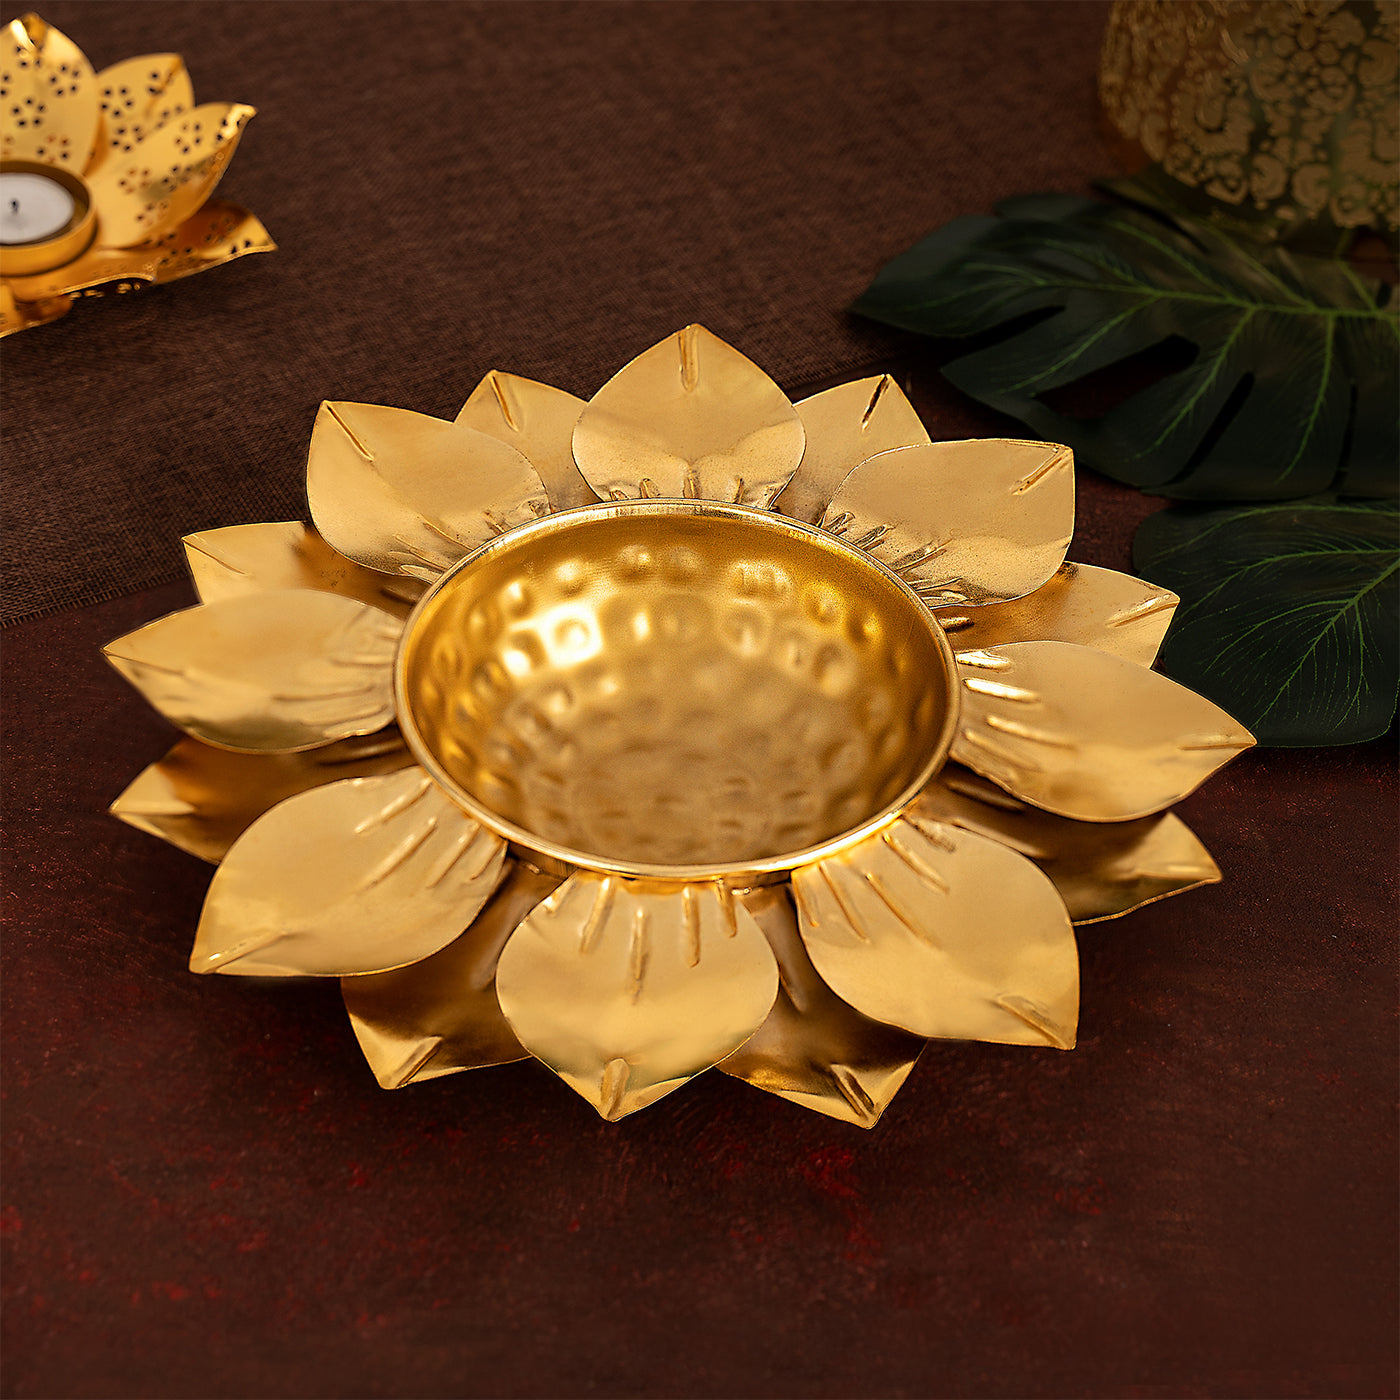 Handcrafted Lotus Urli For Home, Office and Table Decor